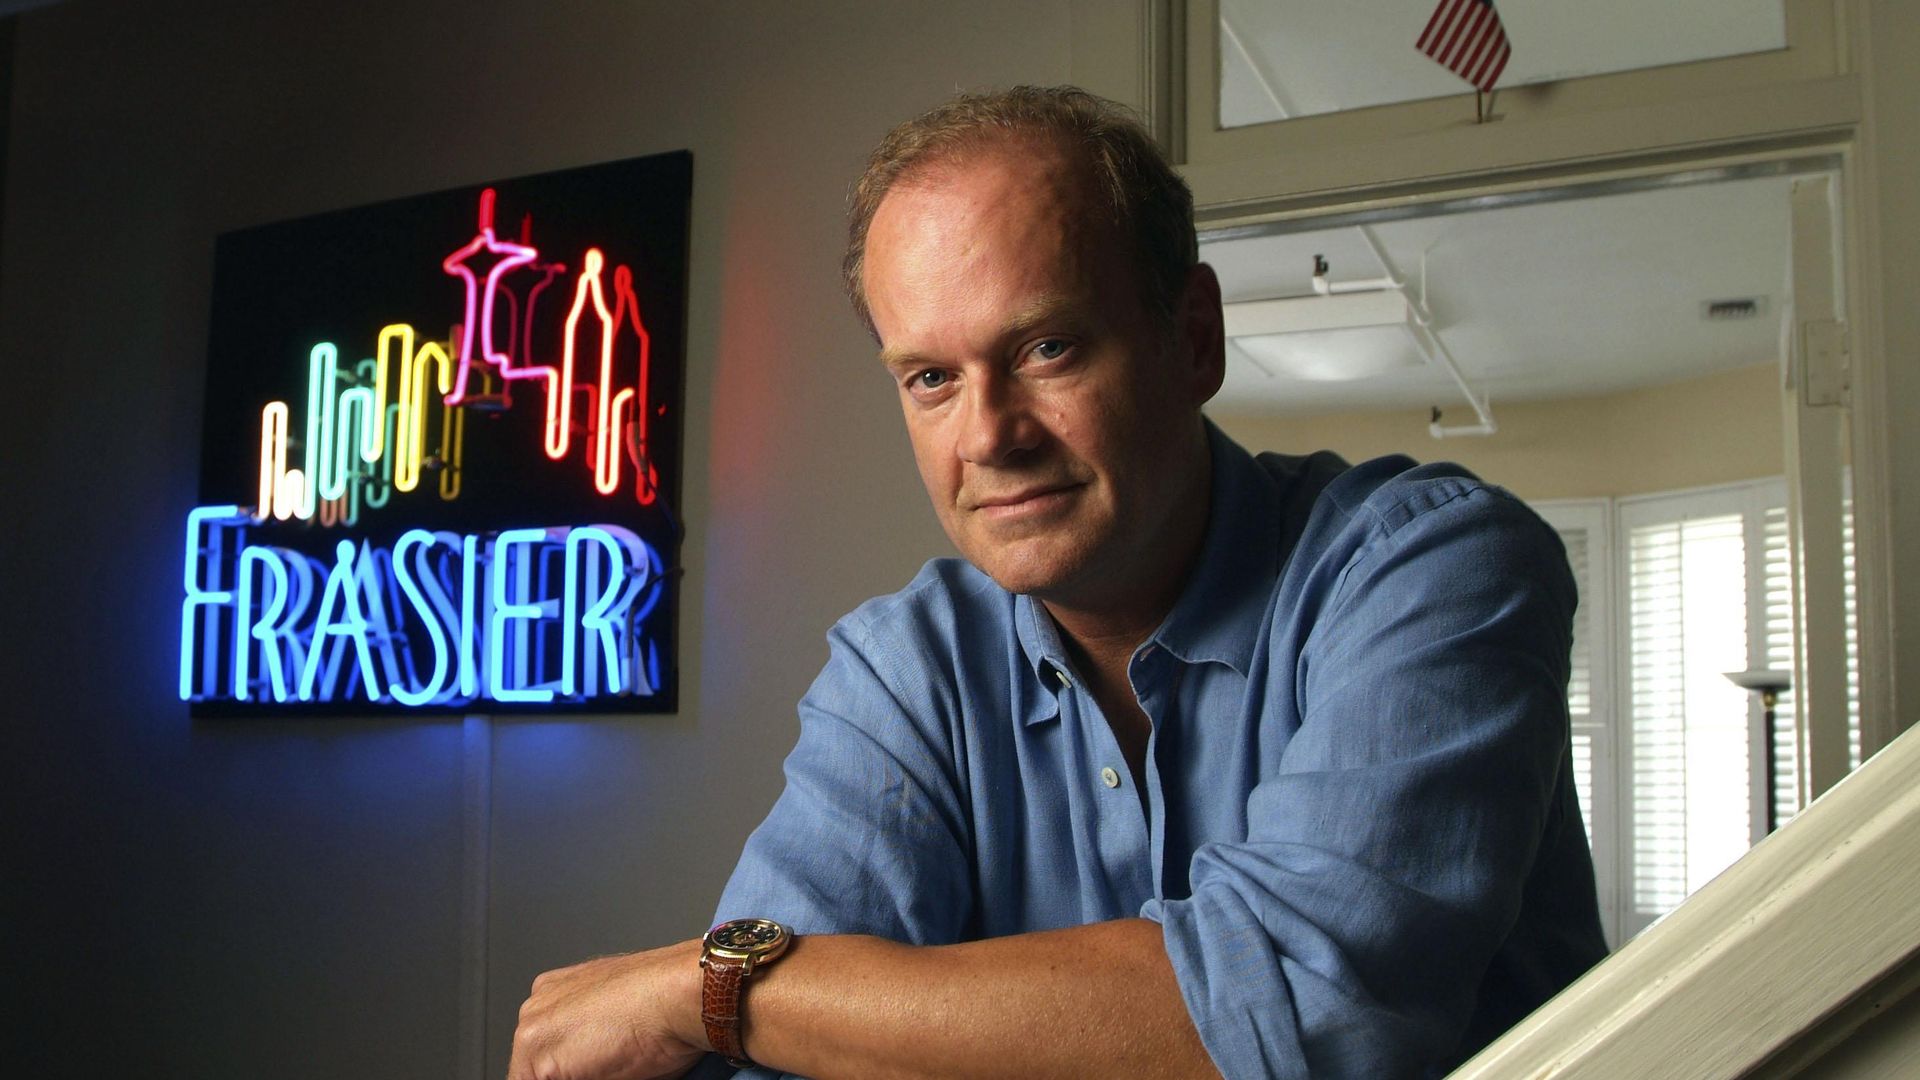 Kelsey Grammar, famous for his role as Frasier  photographed June 9, 2005 in the Lucy Bungalow, his office on the Paramount Studios lot, Los Angeles, California